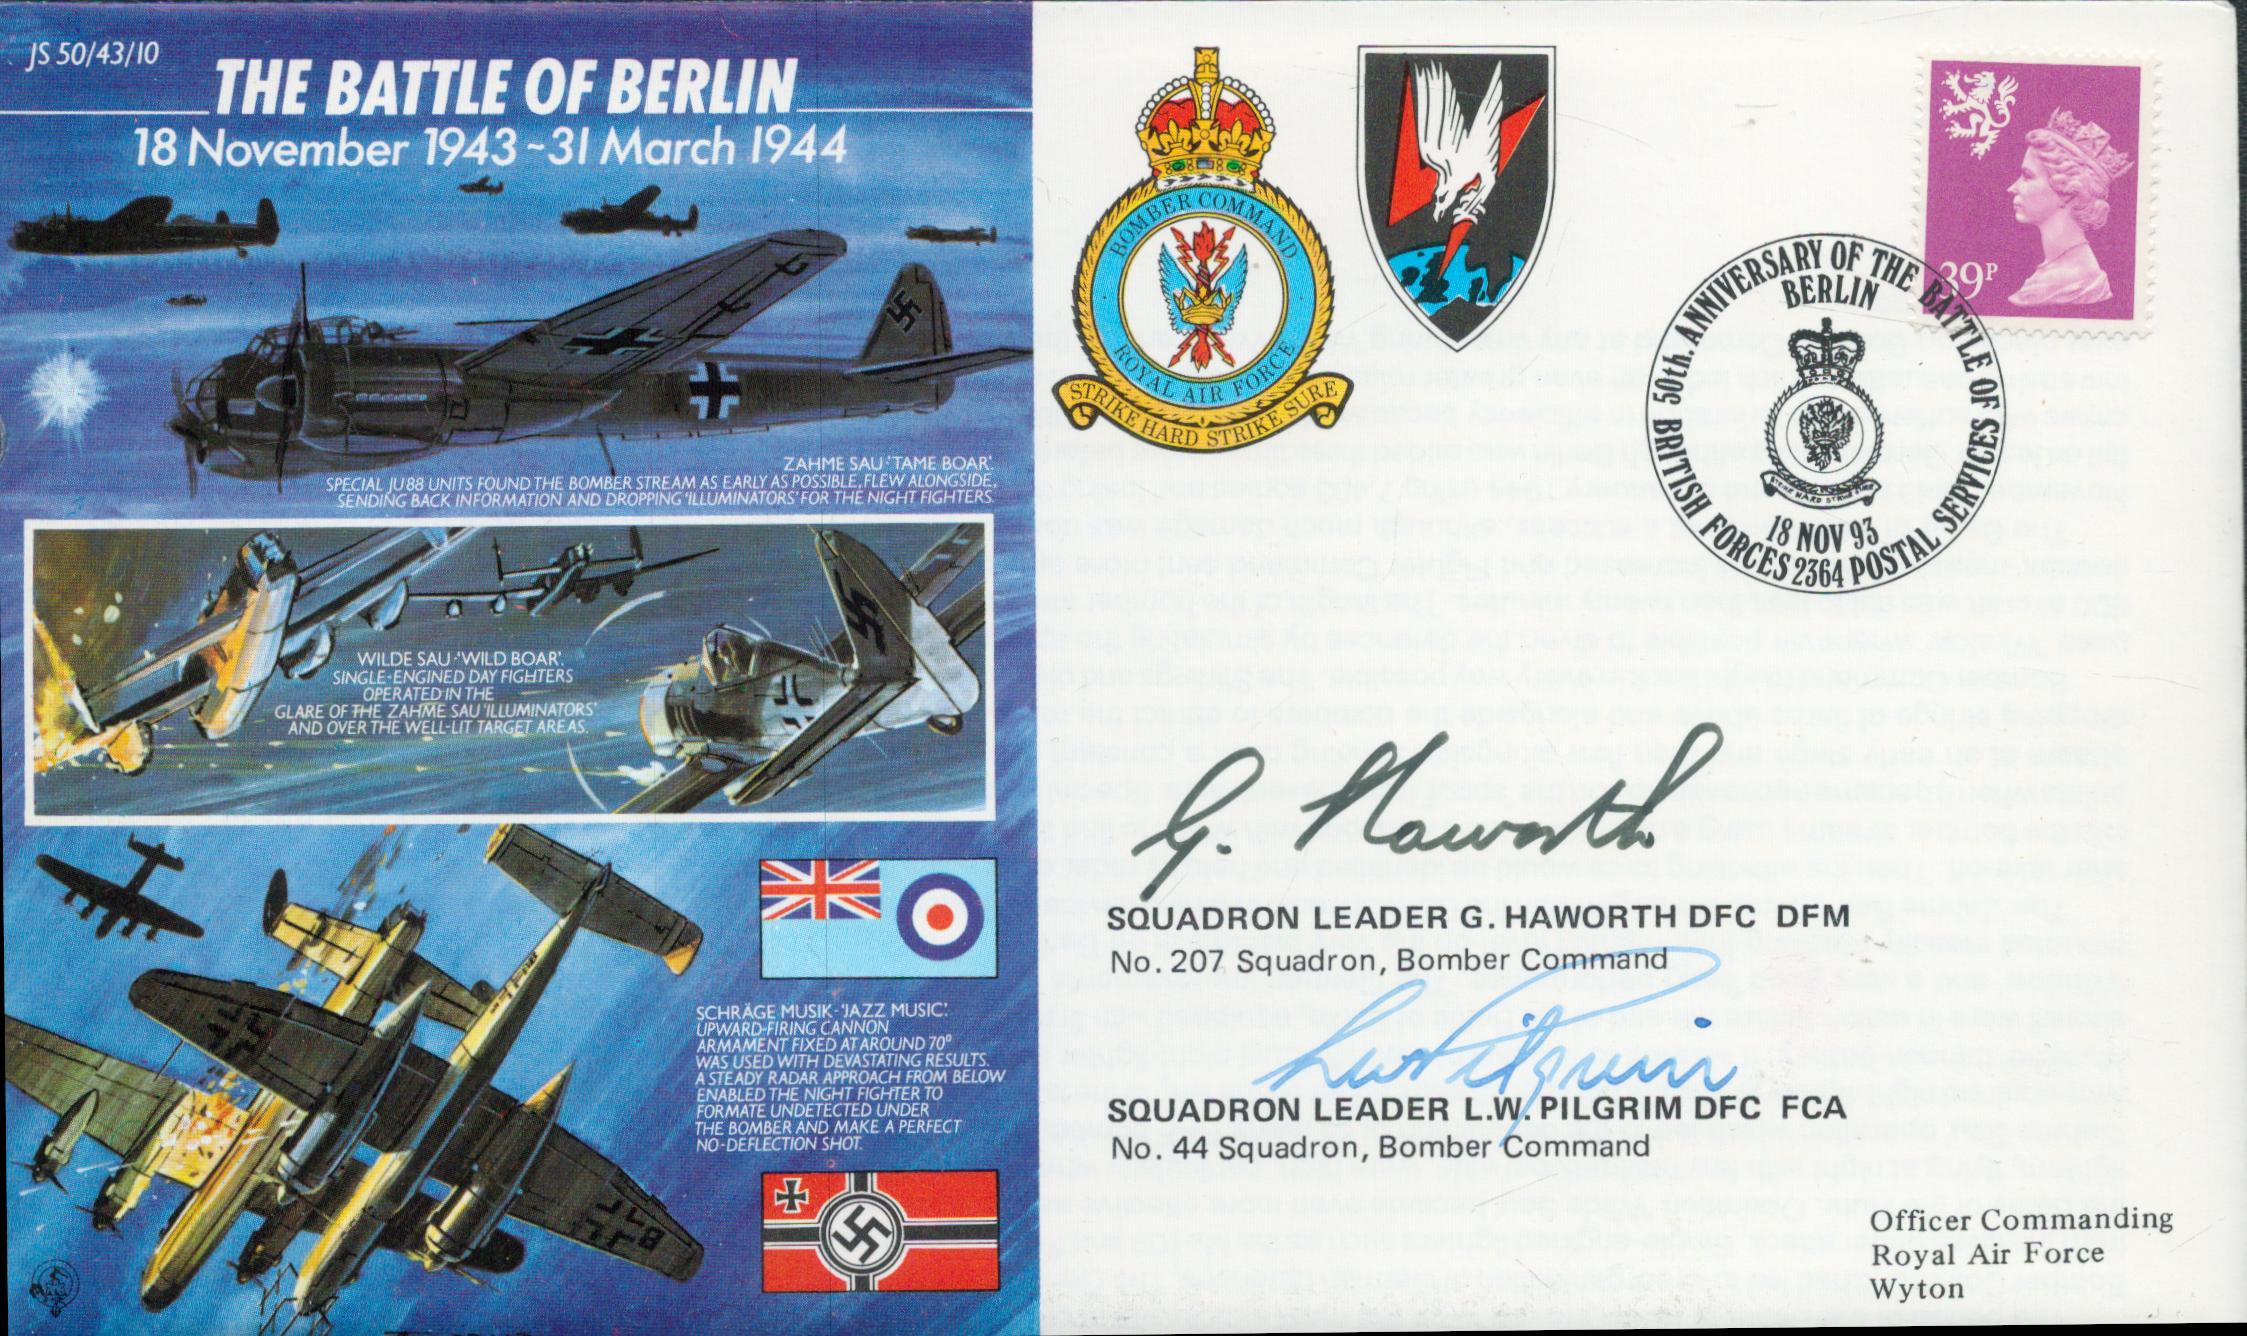 The Battle of Berlin double signed 50th ann WW2 cover JS50/43/10. Signed by veterans Sqn Ldr Haworth